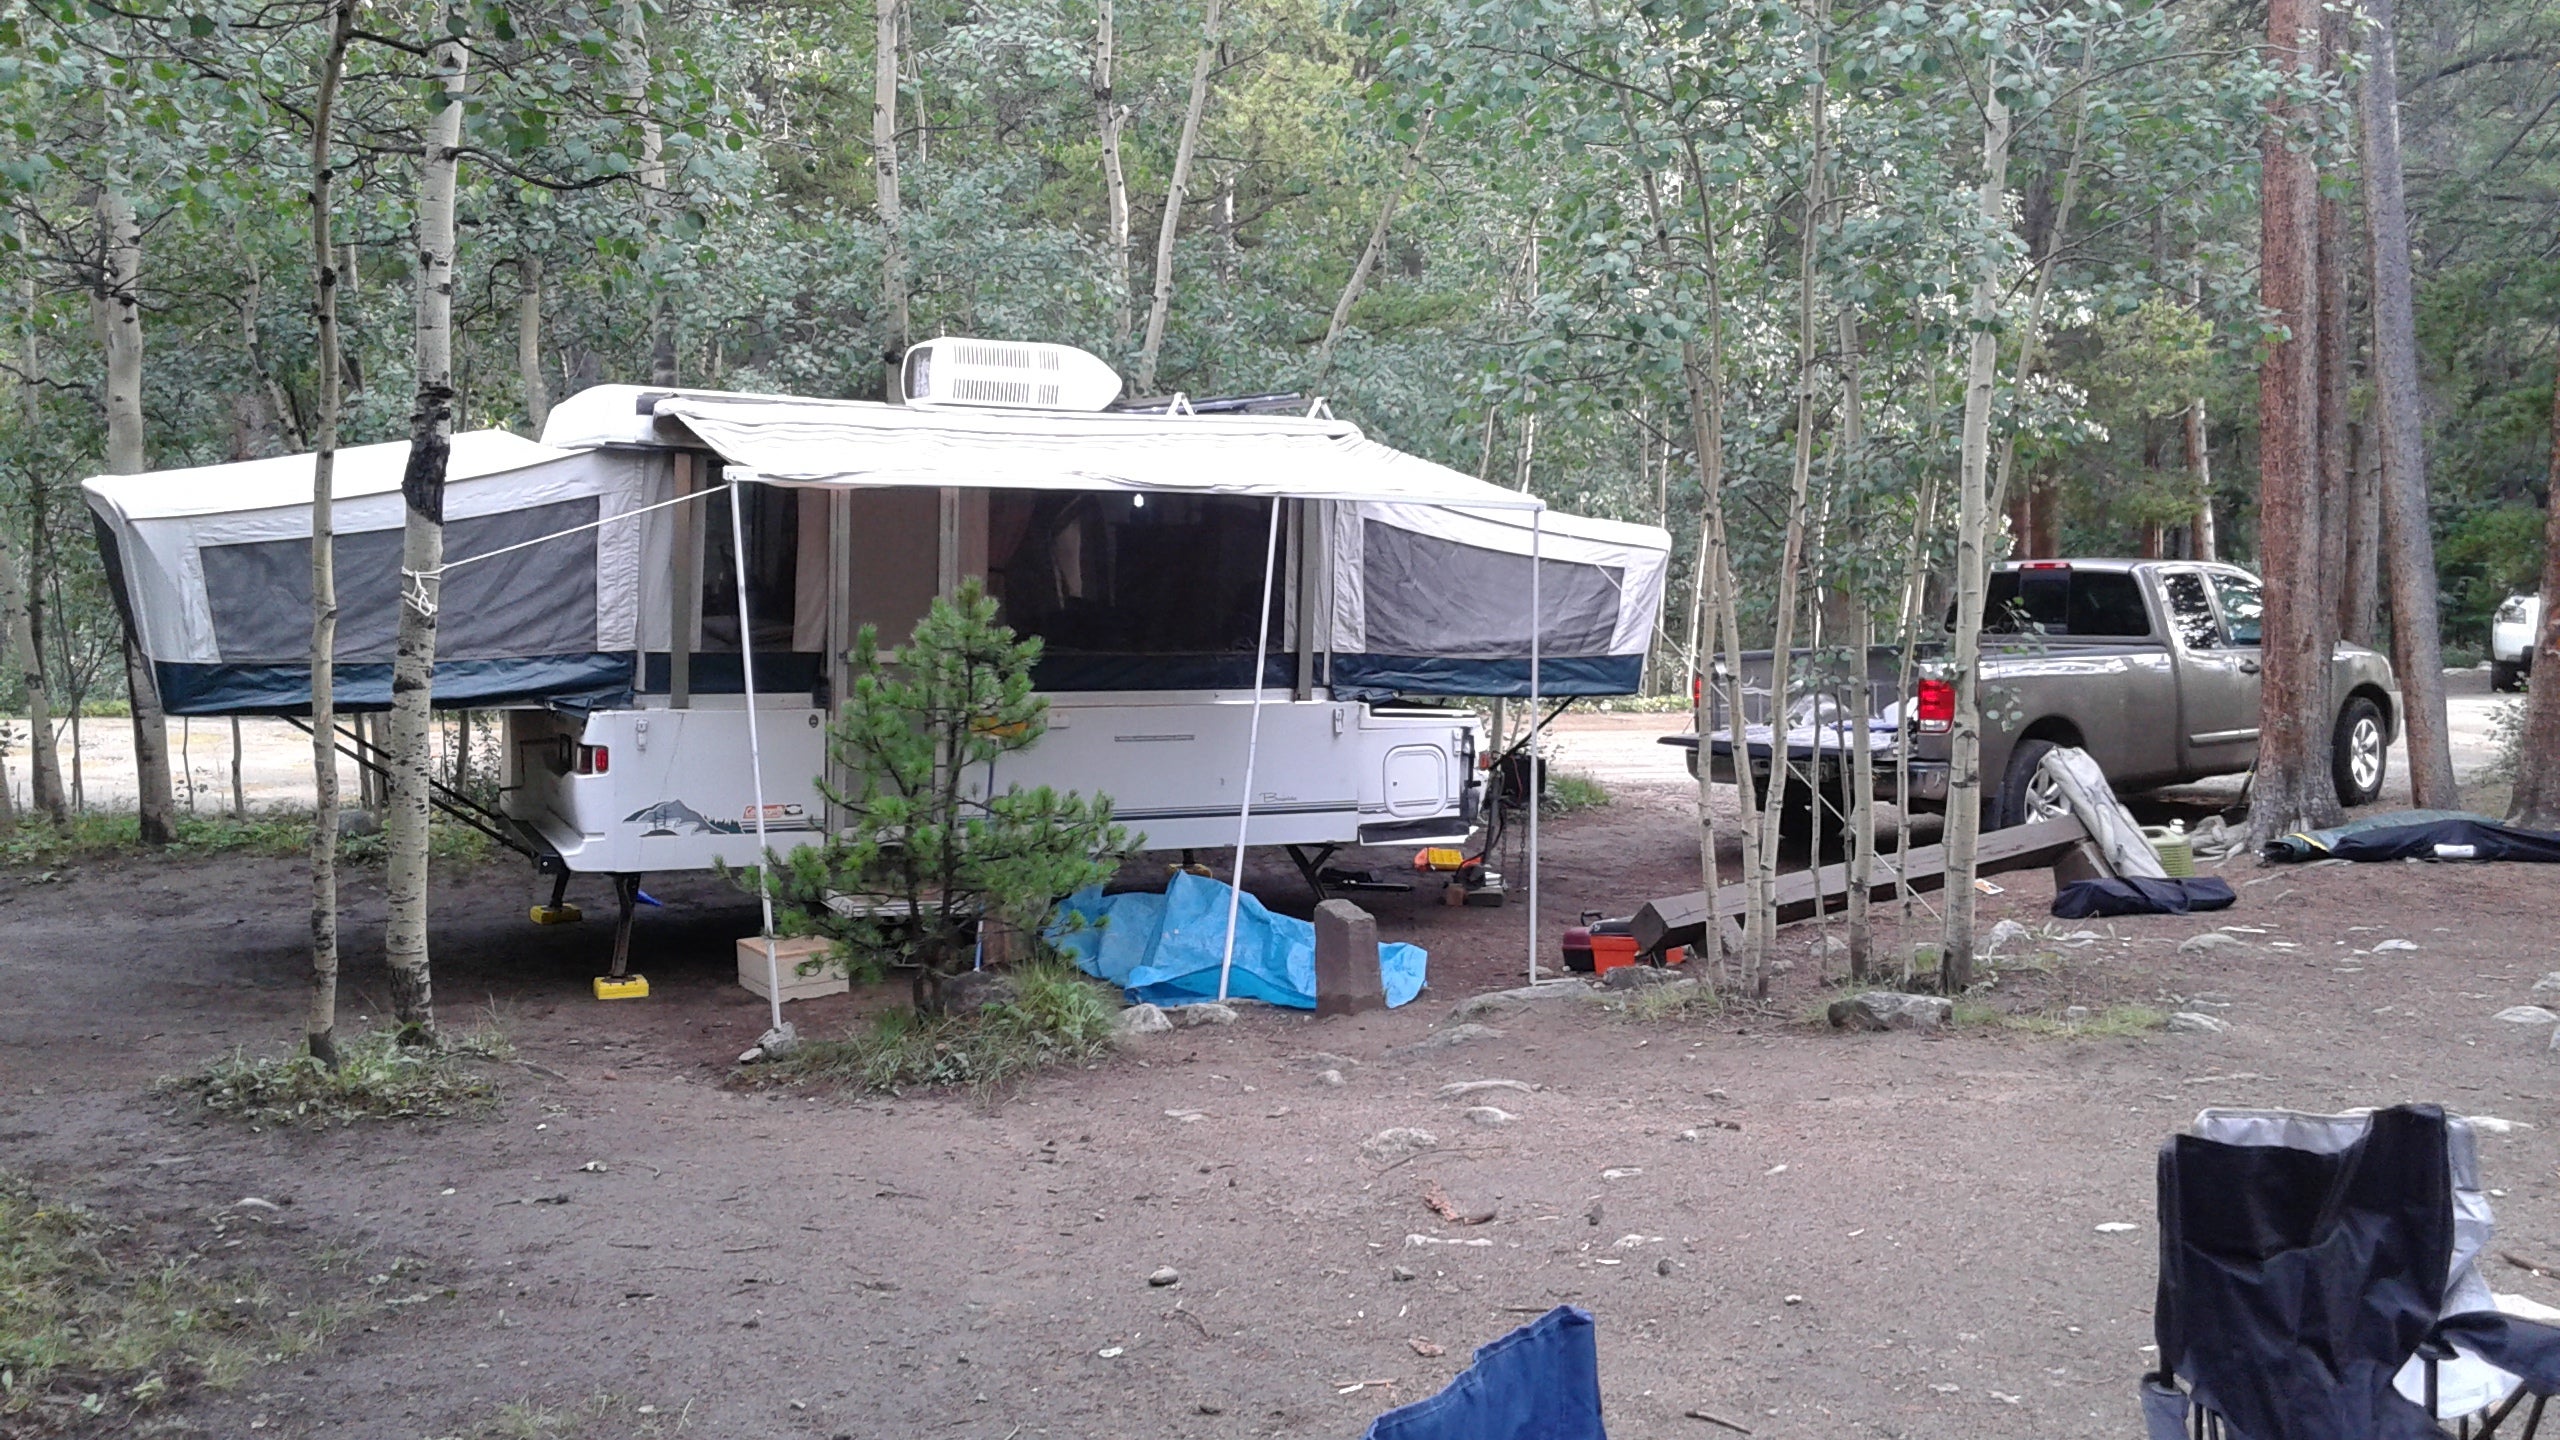 Camper submitted image from Collegiate Peaks - 4